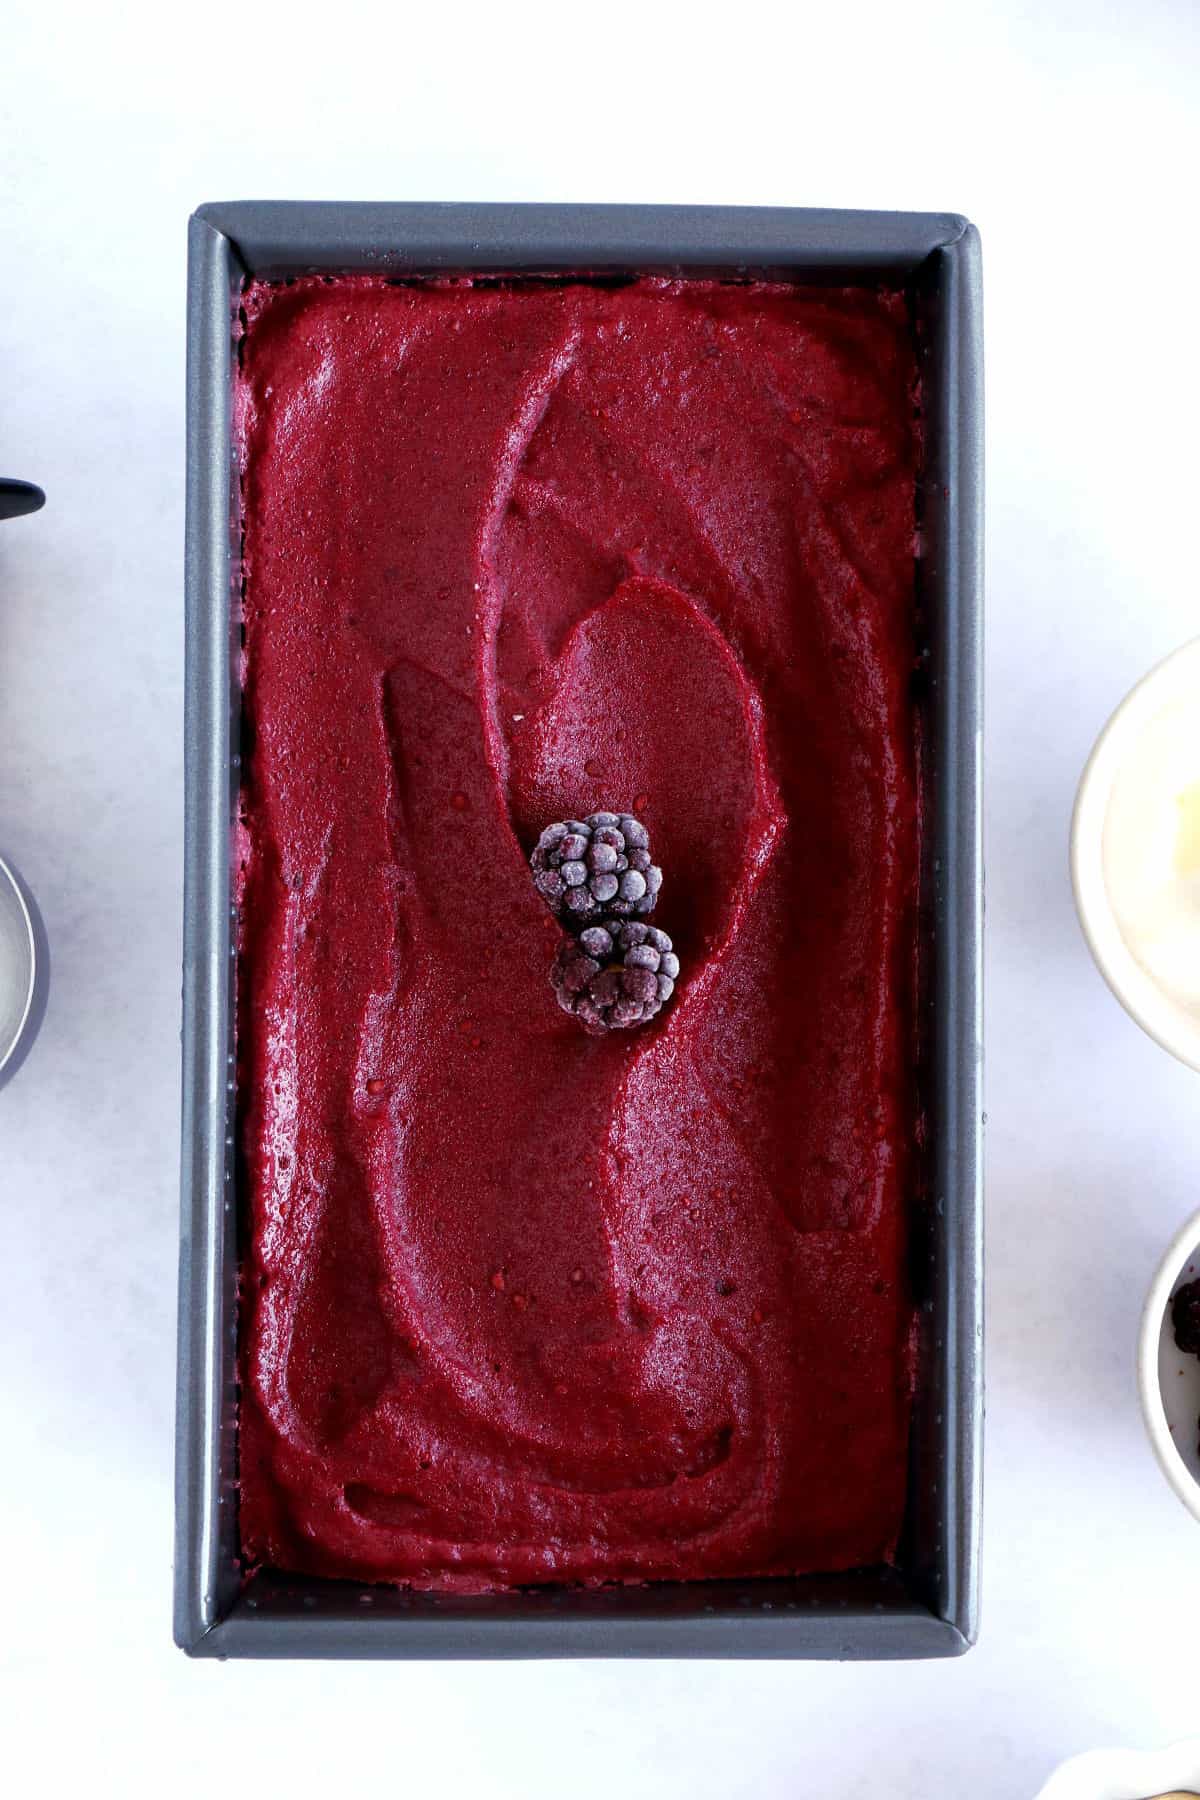 5-minute berry frozen yogurt is the ultimate treat to indulge on a hot summer day. It's quick, super healthy, and packed with protein.